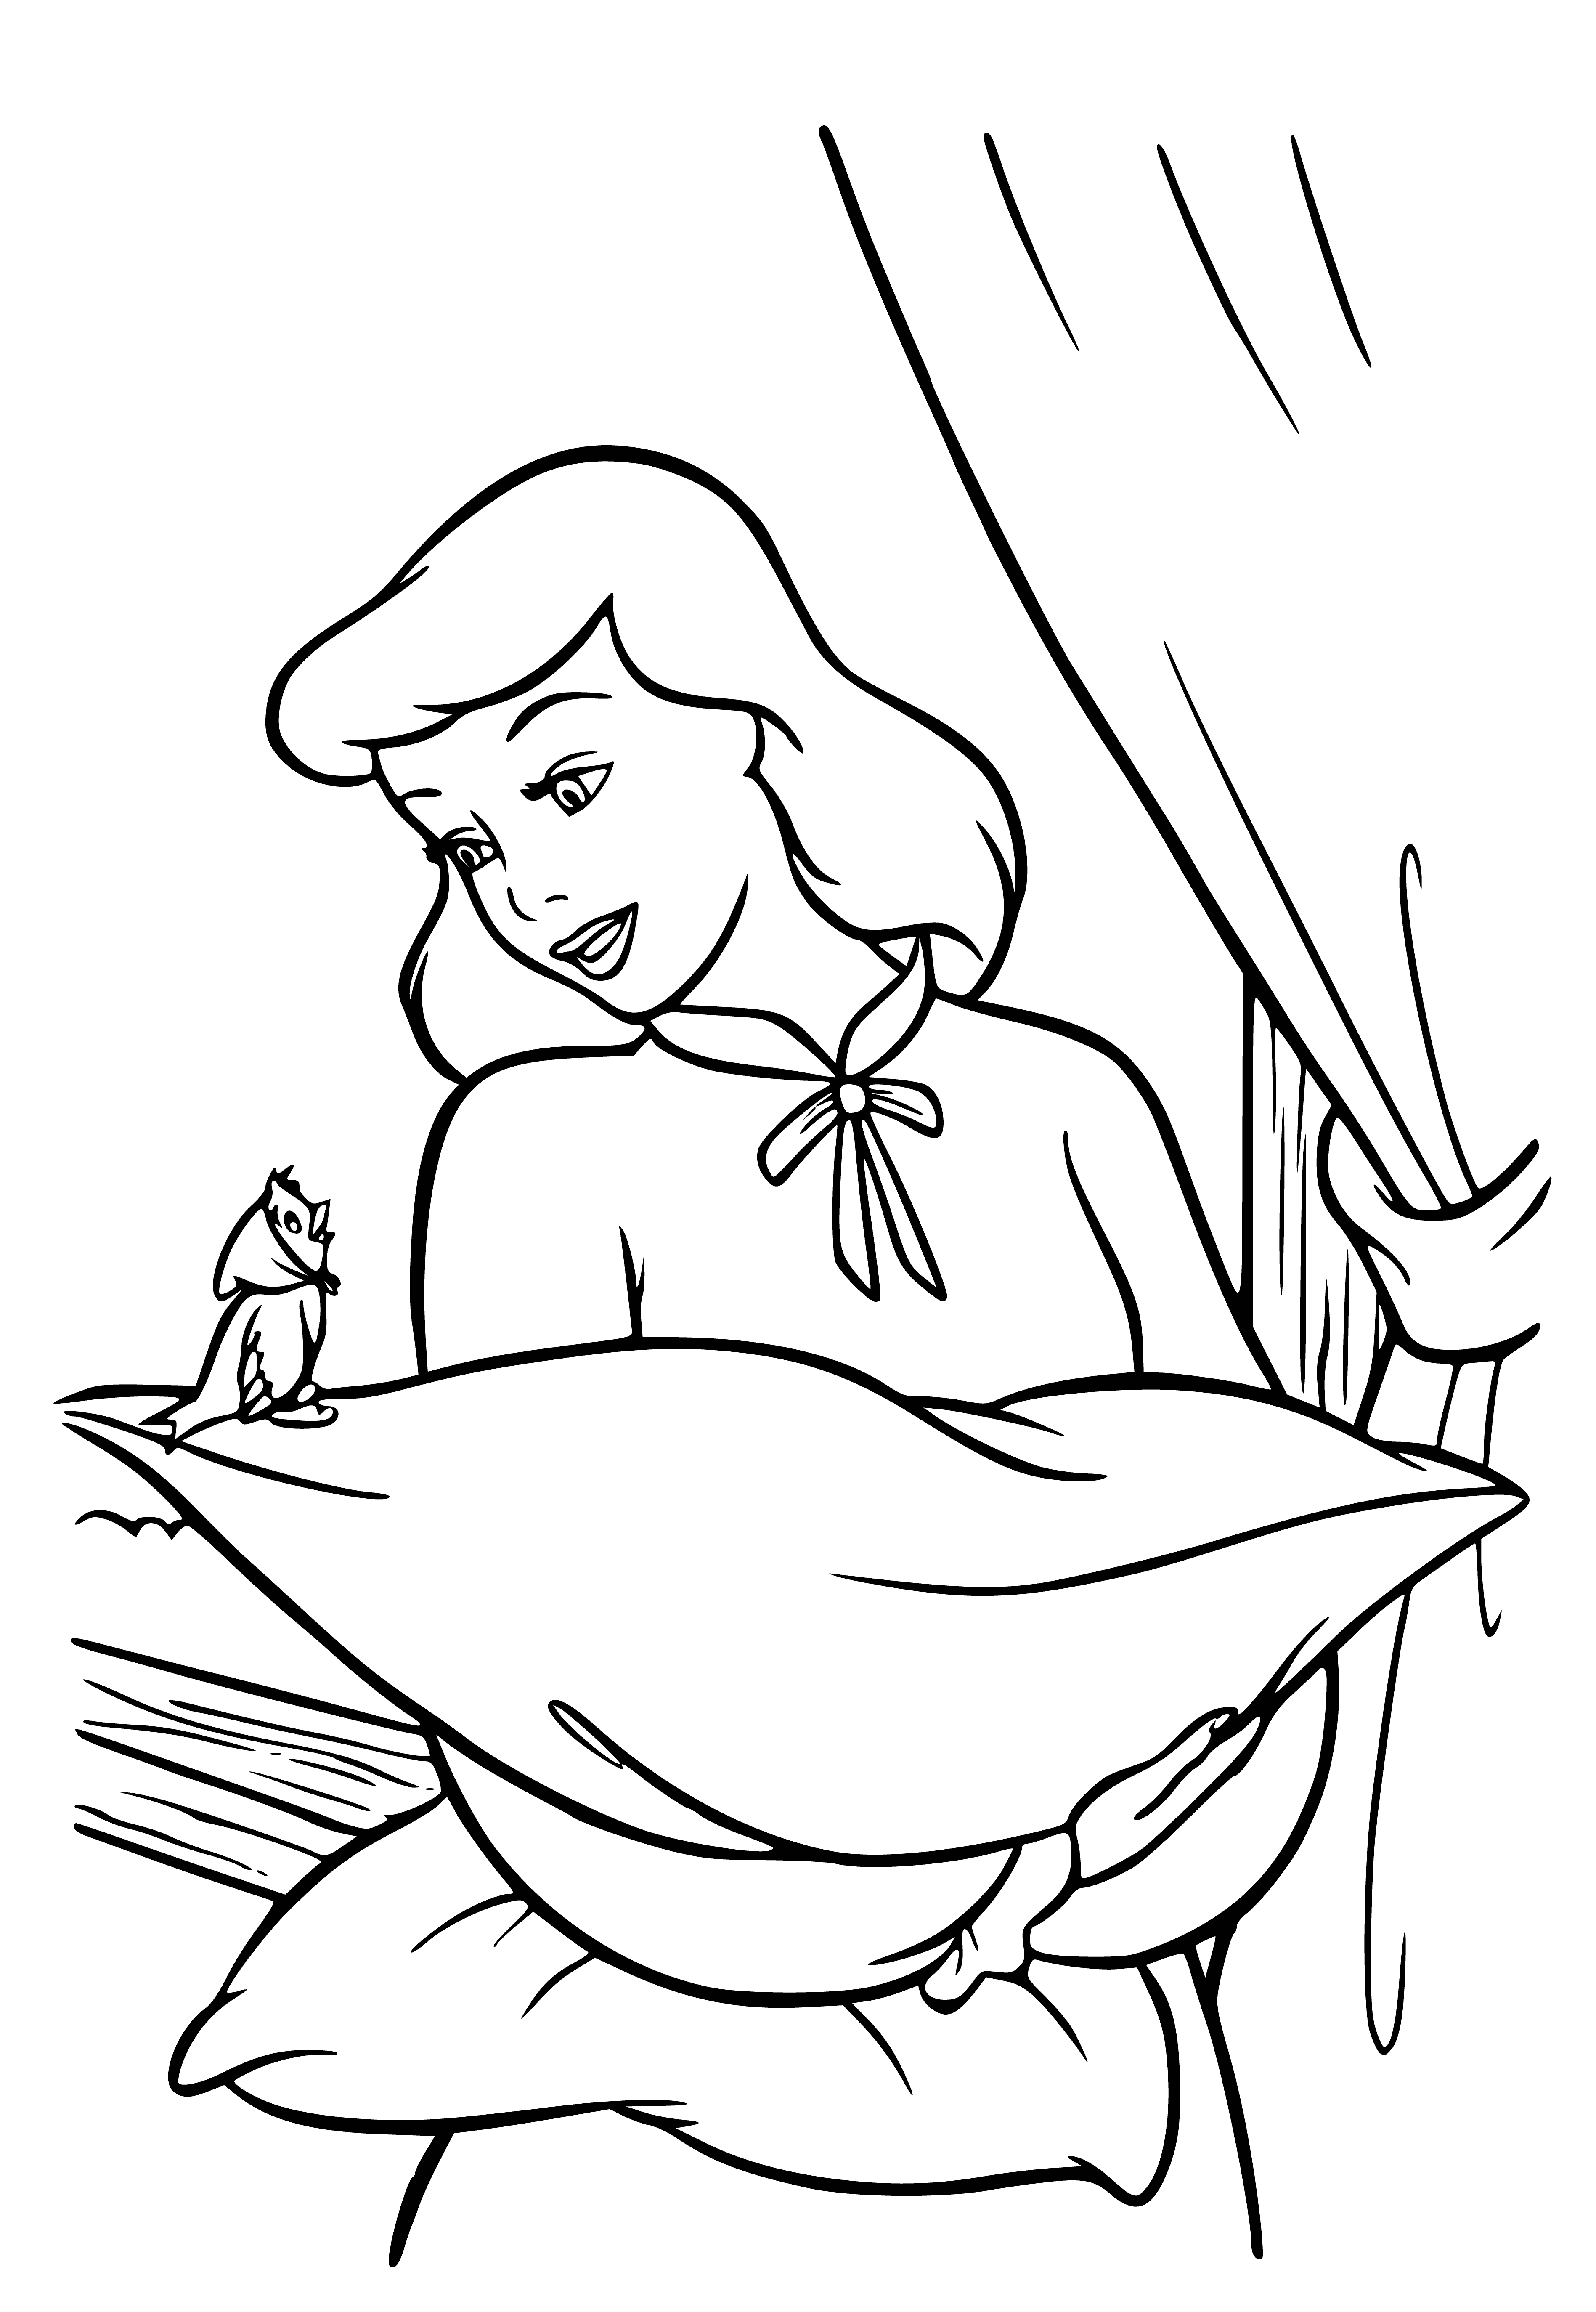 coloring page: Woman in blue dress sings in tall grass as three birds fly around her.